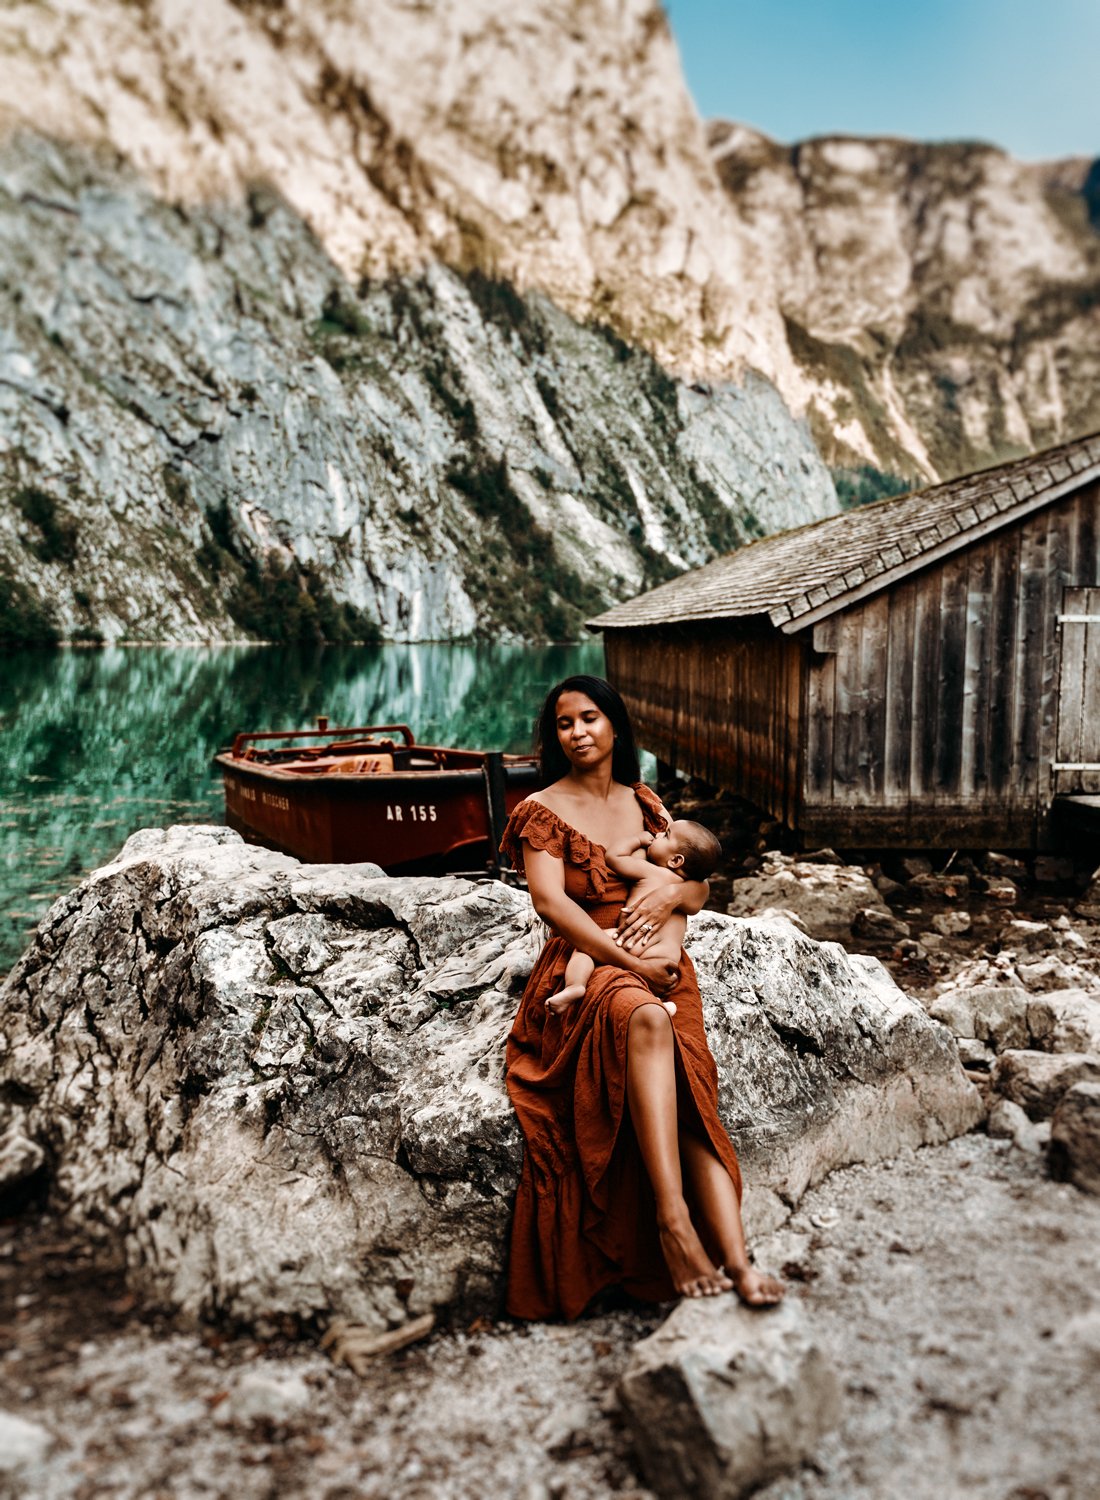 young-mother-brestfeeding-her-baby-sitting-by-a-lake-house-in-long-orange-dress-emotive-storytelling-family-photography-by-sarah-havens-ramstein-kaiserslautern-kmc-germany - Copy.jpg